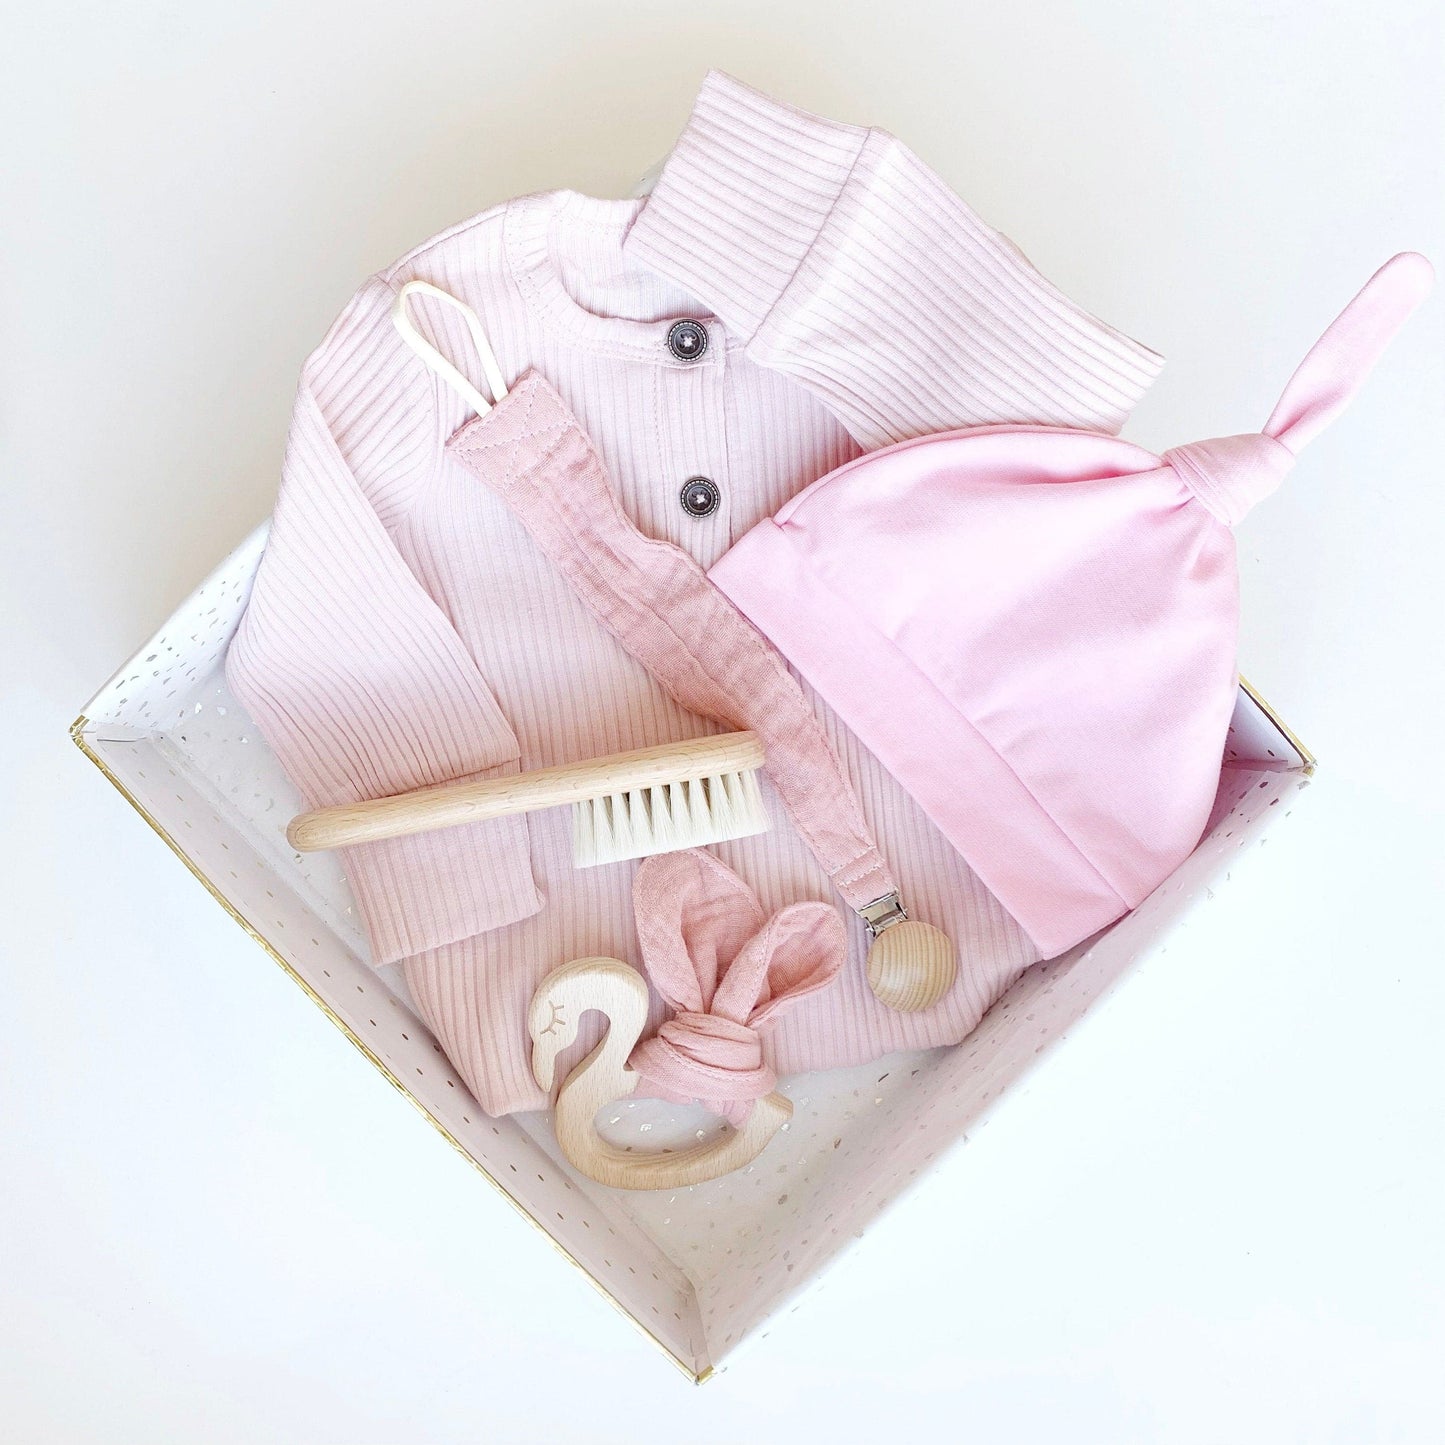 Baby Girl Gift Personalized, Box Set, Pink Baby Shower Gift basket, Custom Name hat, Going home outfit, flamingos, Custom Girl Clothing Gift.